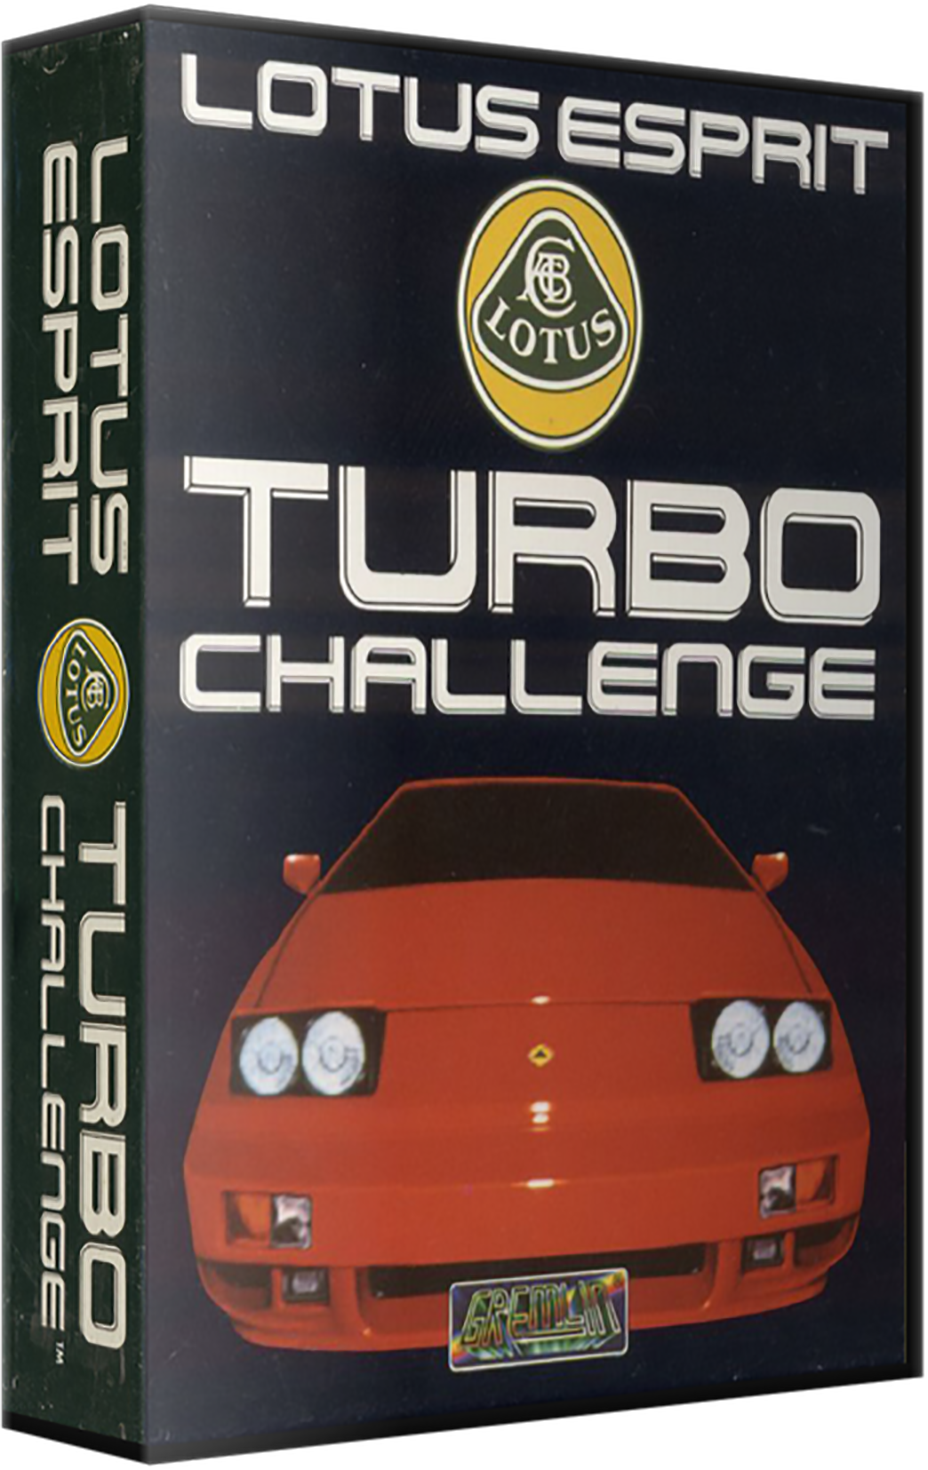 The Collection Chamber: LOTUS ESPRIT TURBO CHALLENGE TRILOGY